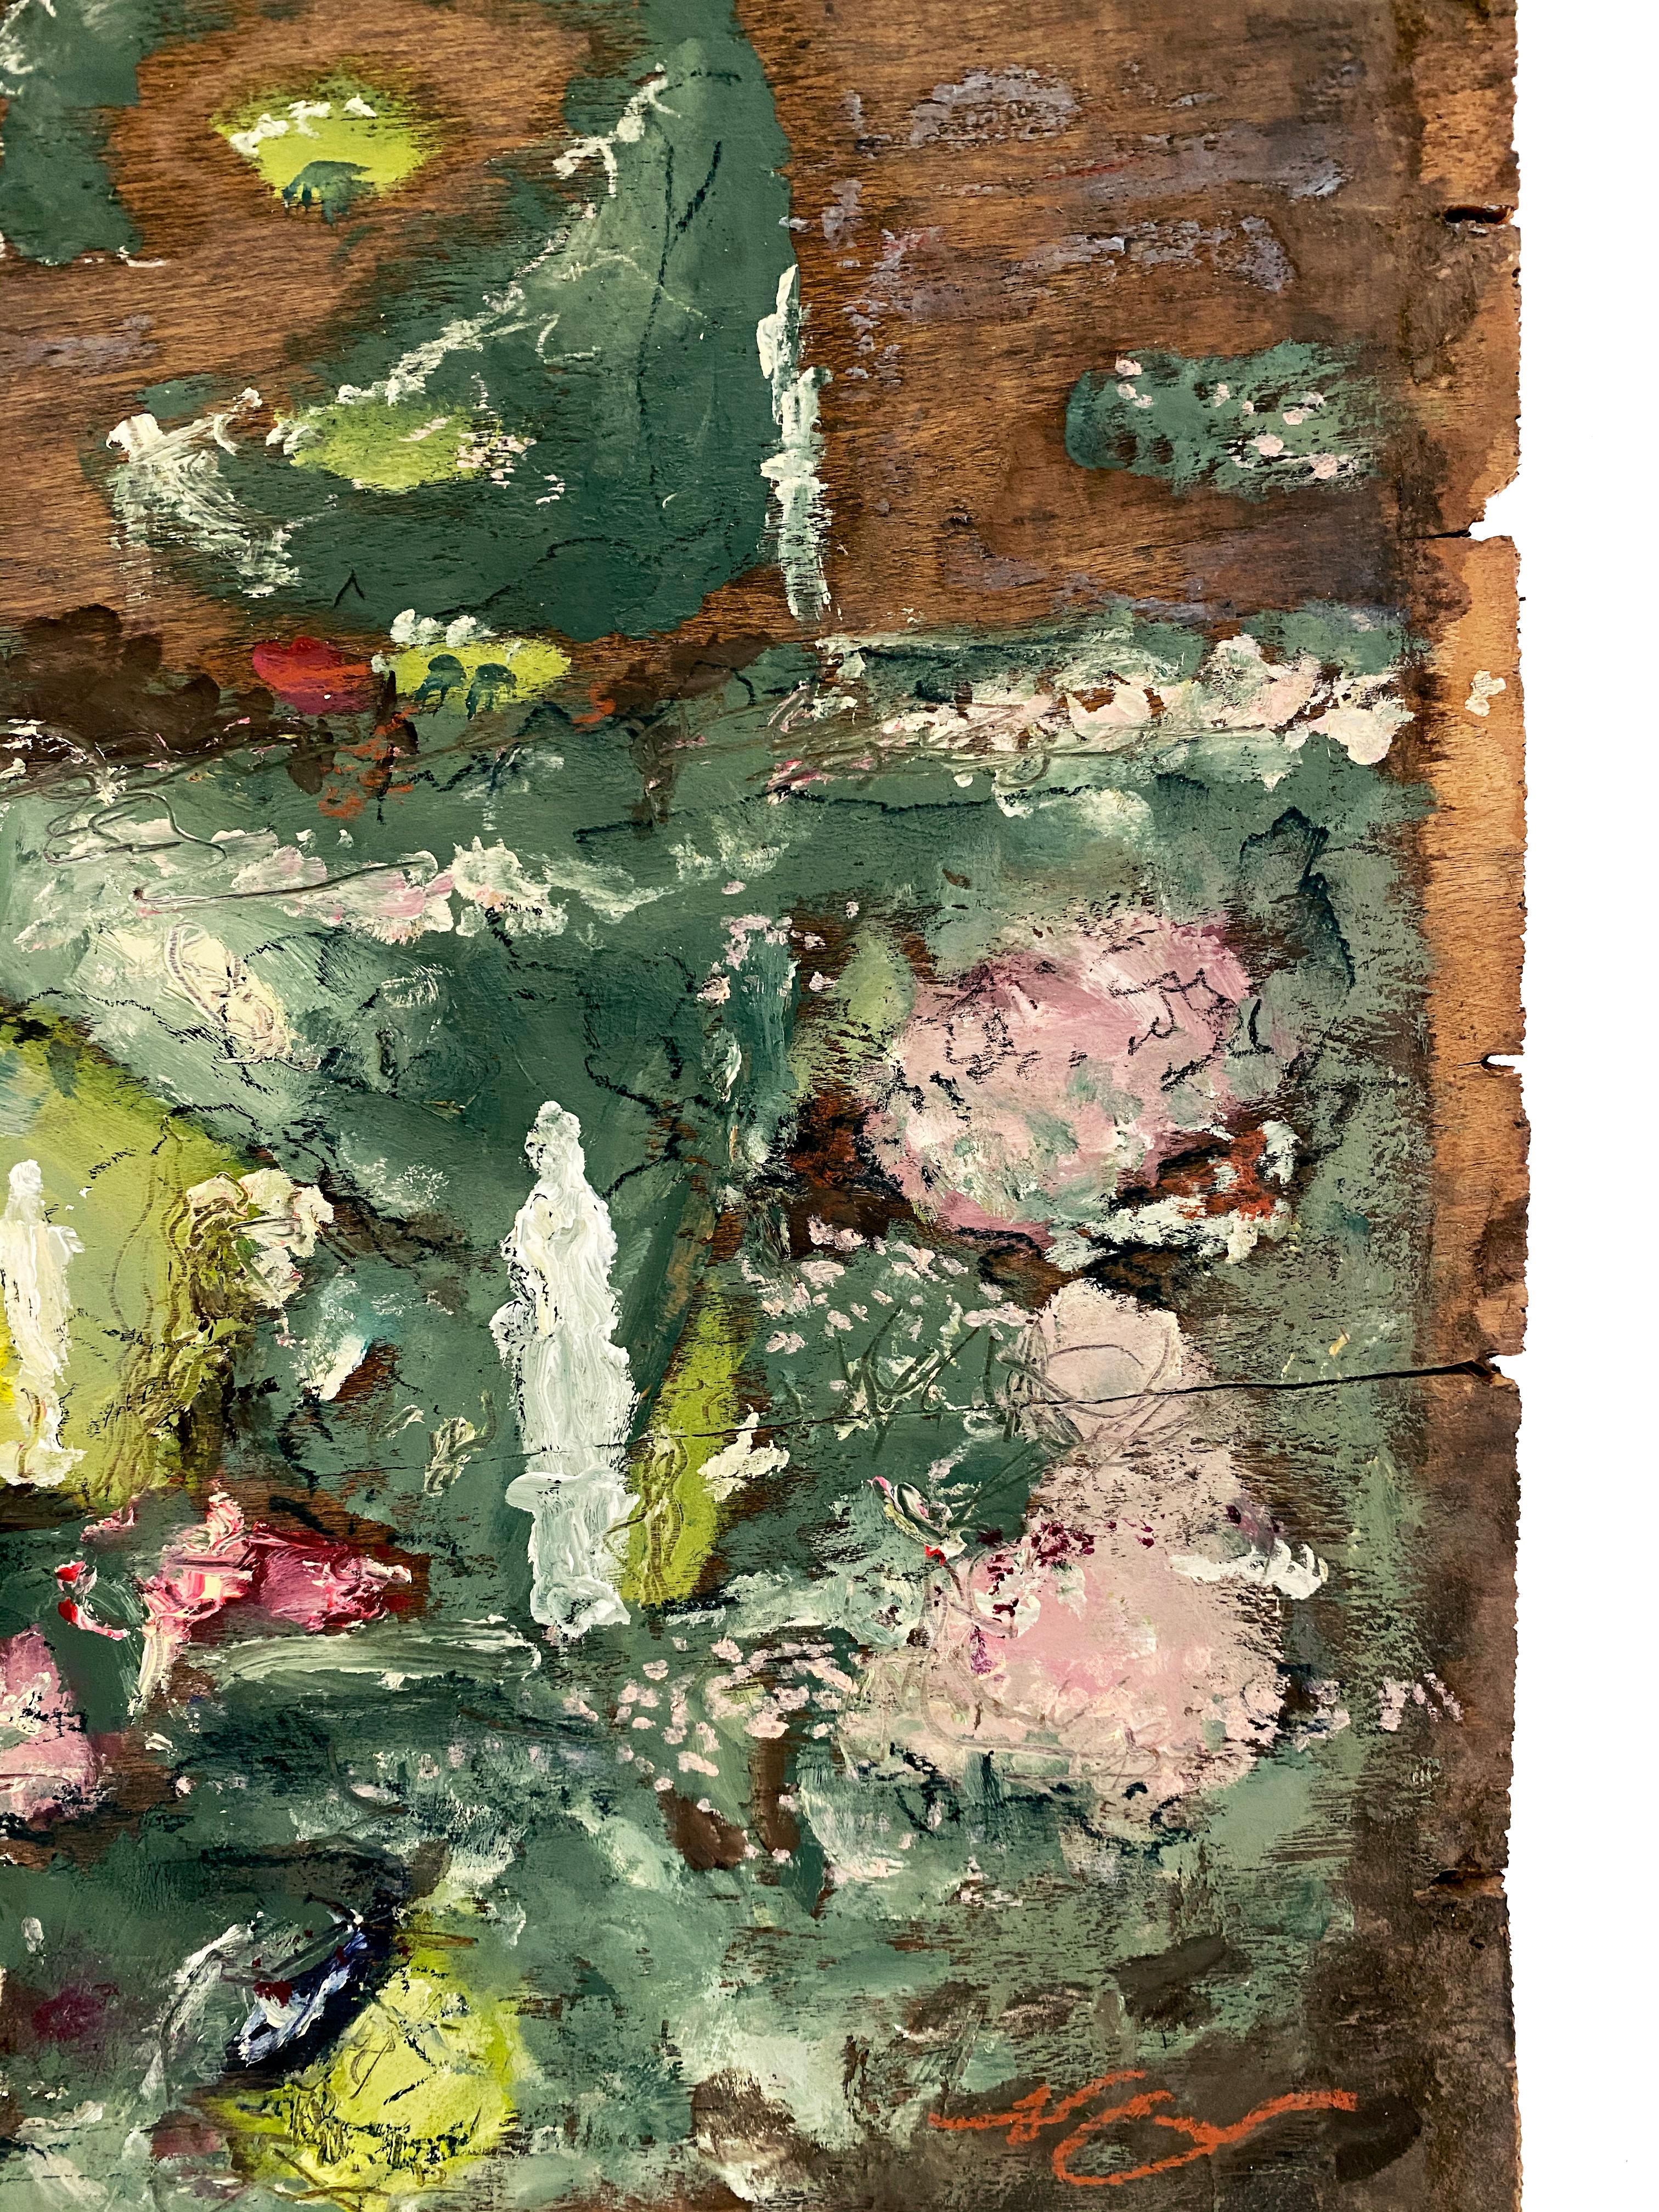 SCENTS HANG HEAVY HERE
2021
Paris, France

Abstractly painted, lush garden on antique with subtle purple and white floral details. Beautiful movement through texture and color. Intentionally embracing uniqueness of reclaimed objects, Evans uses